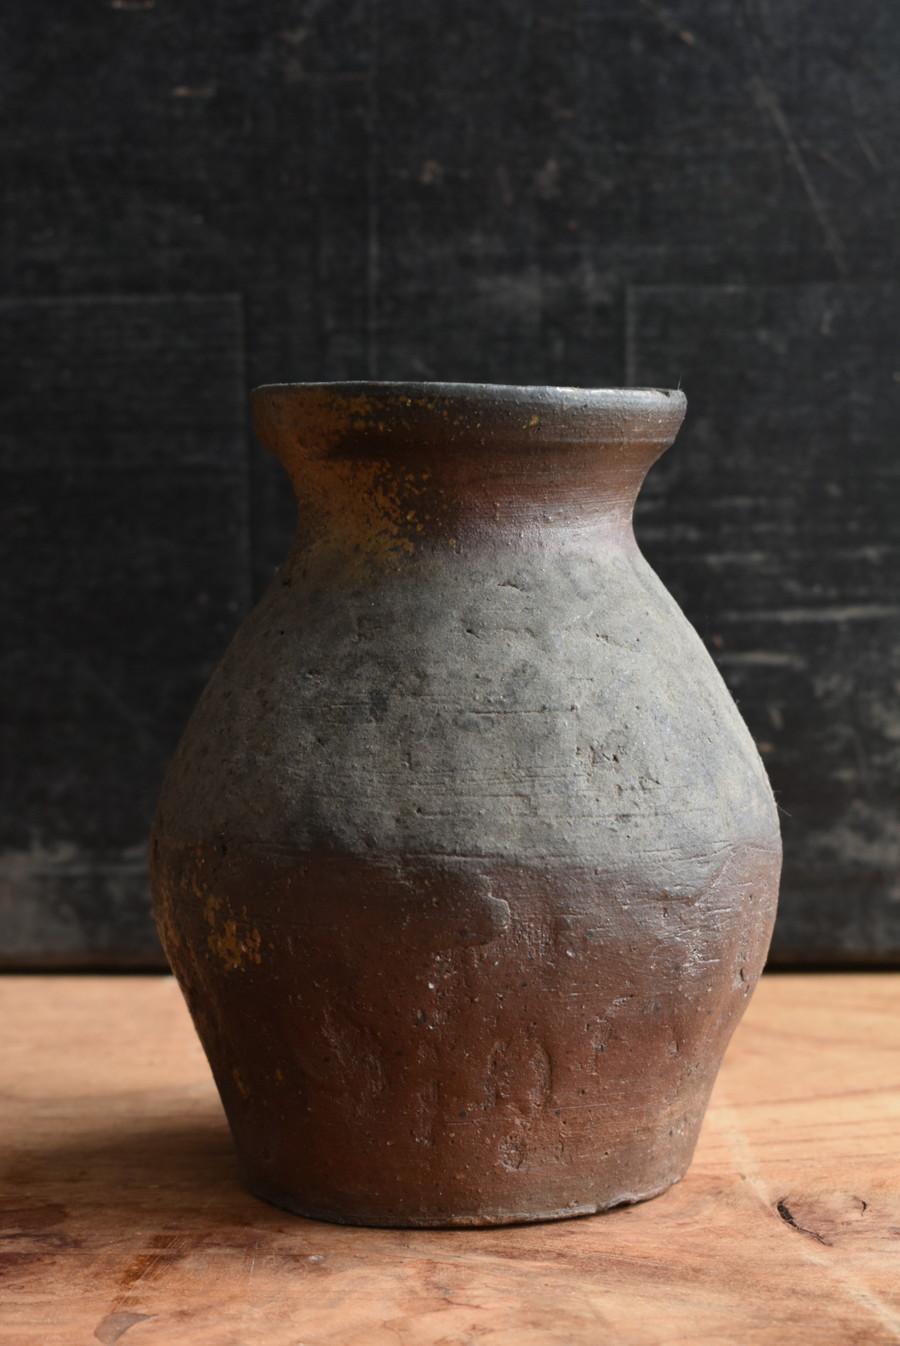 This is a Japanese Echizen ware pot.
It is 